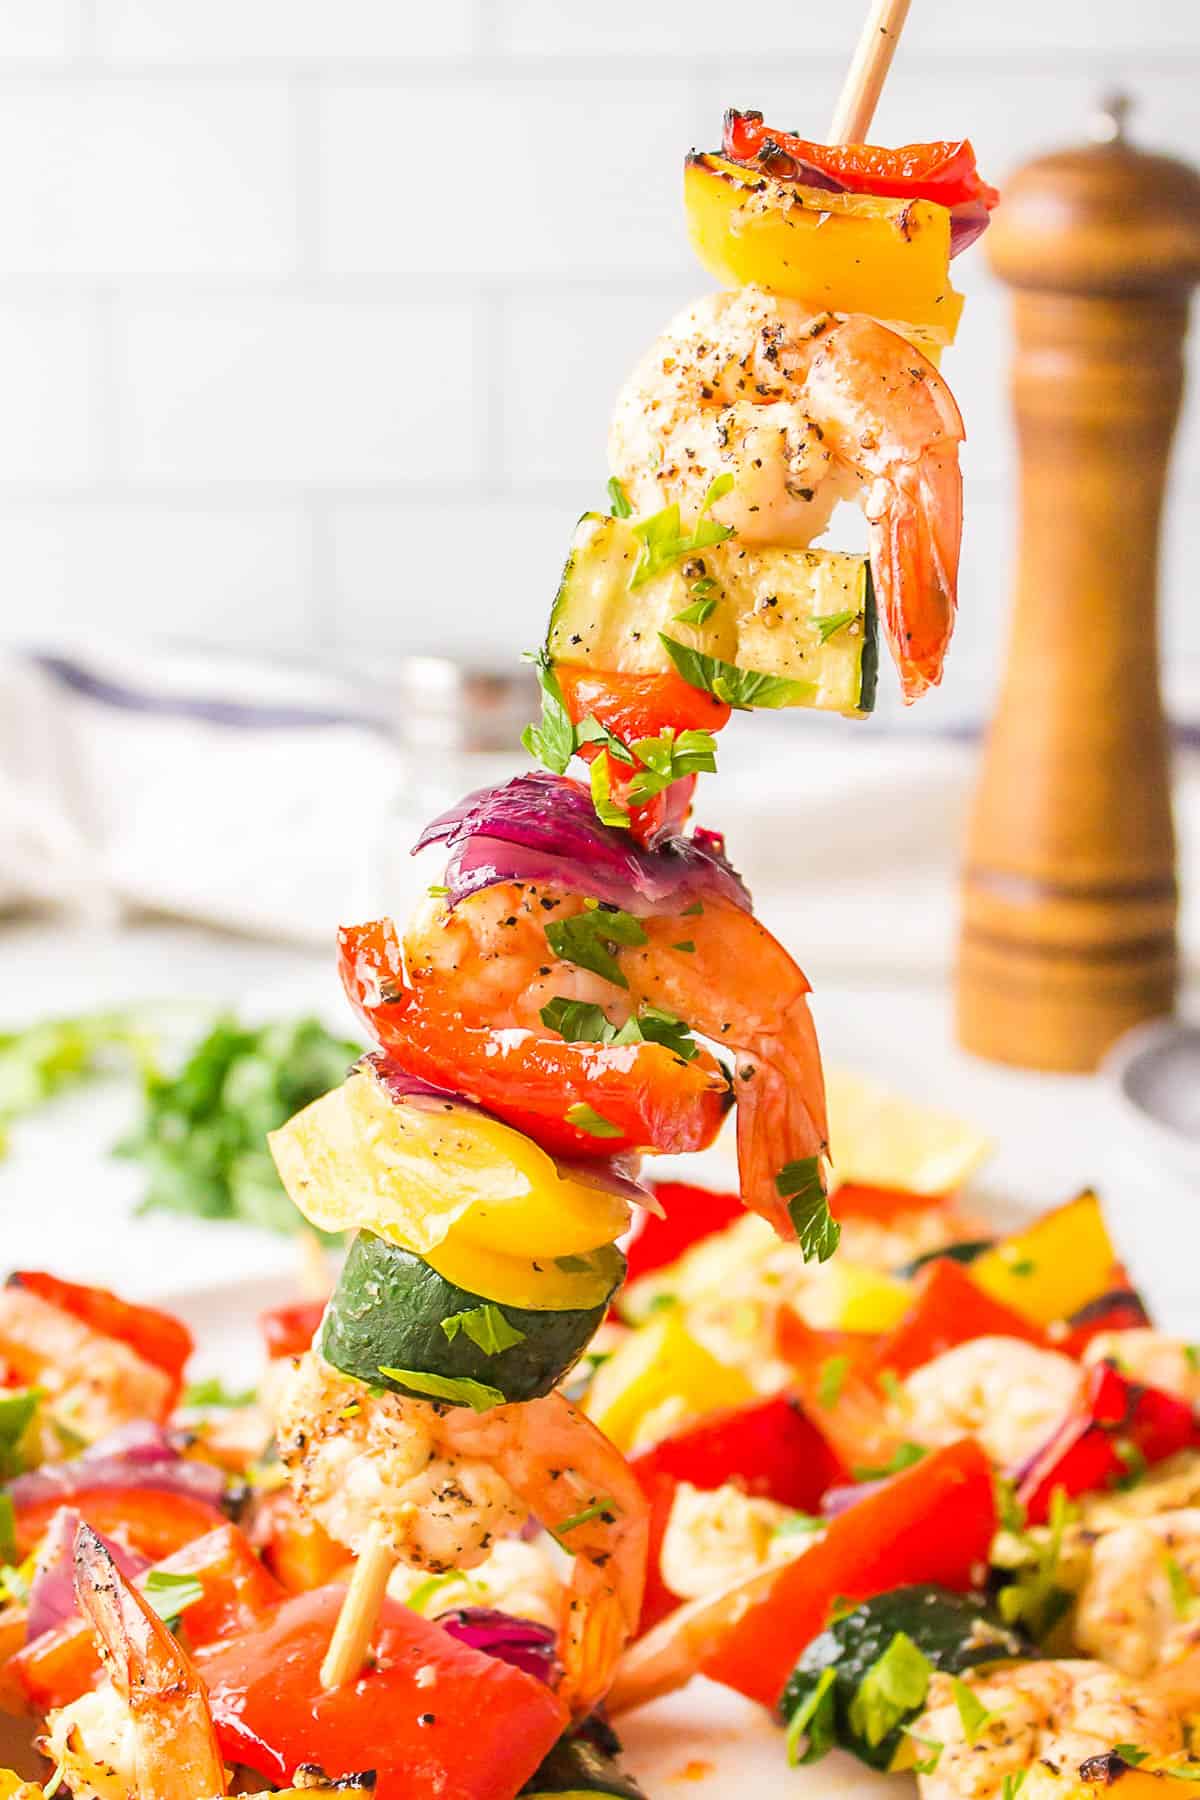 Holding up a shrimp skewer with veggies. 